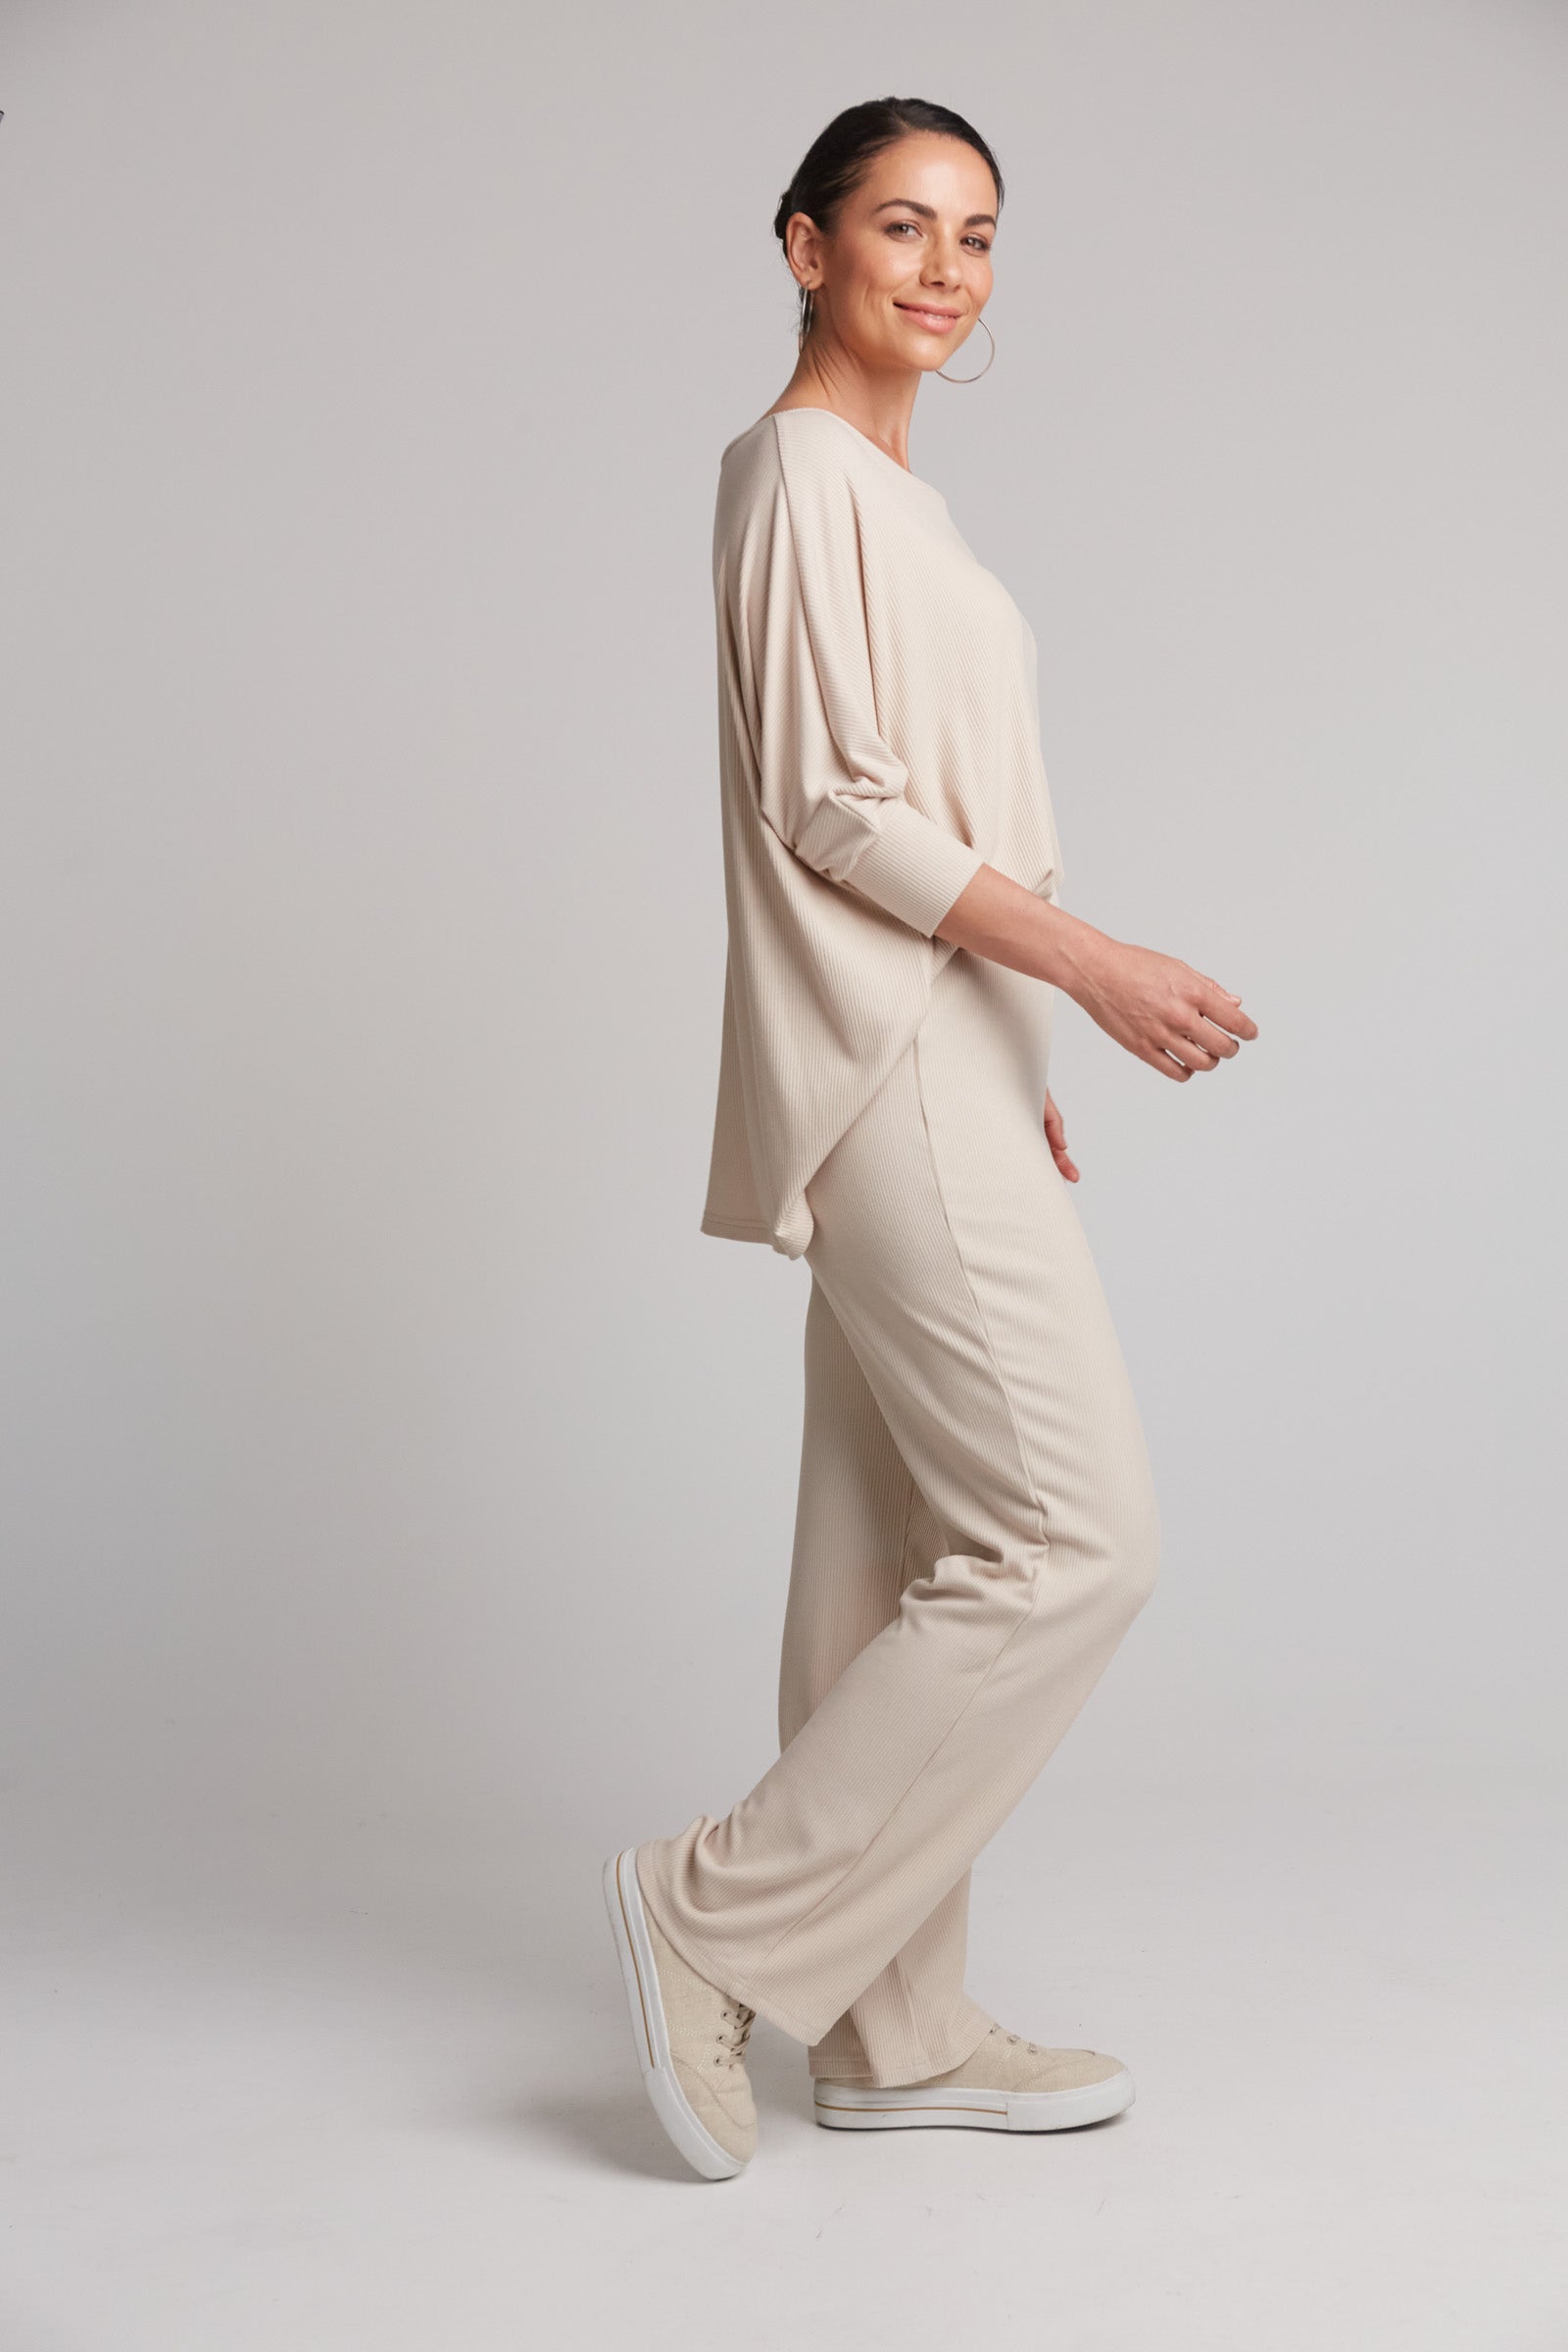 Studio Jersey Pant - Tusk - eb&ive Clothing - Pant Relaxed Jersey